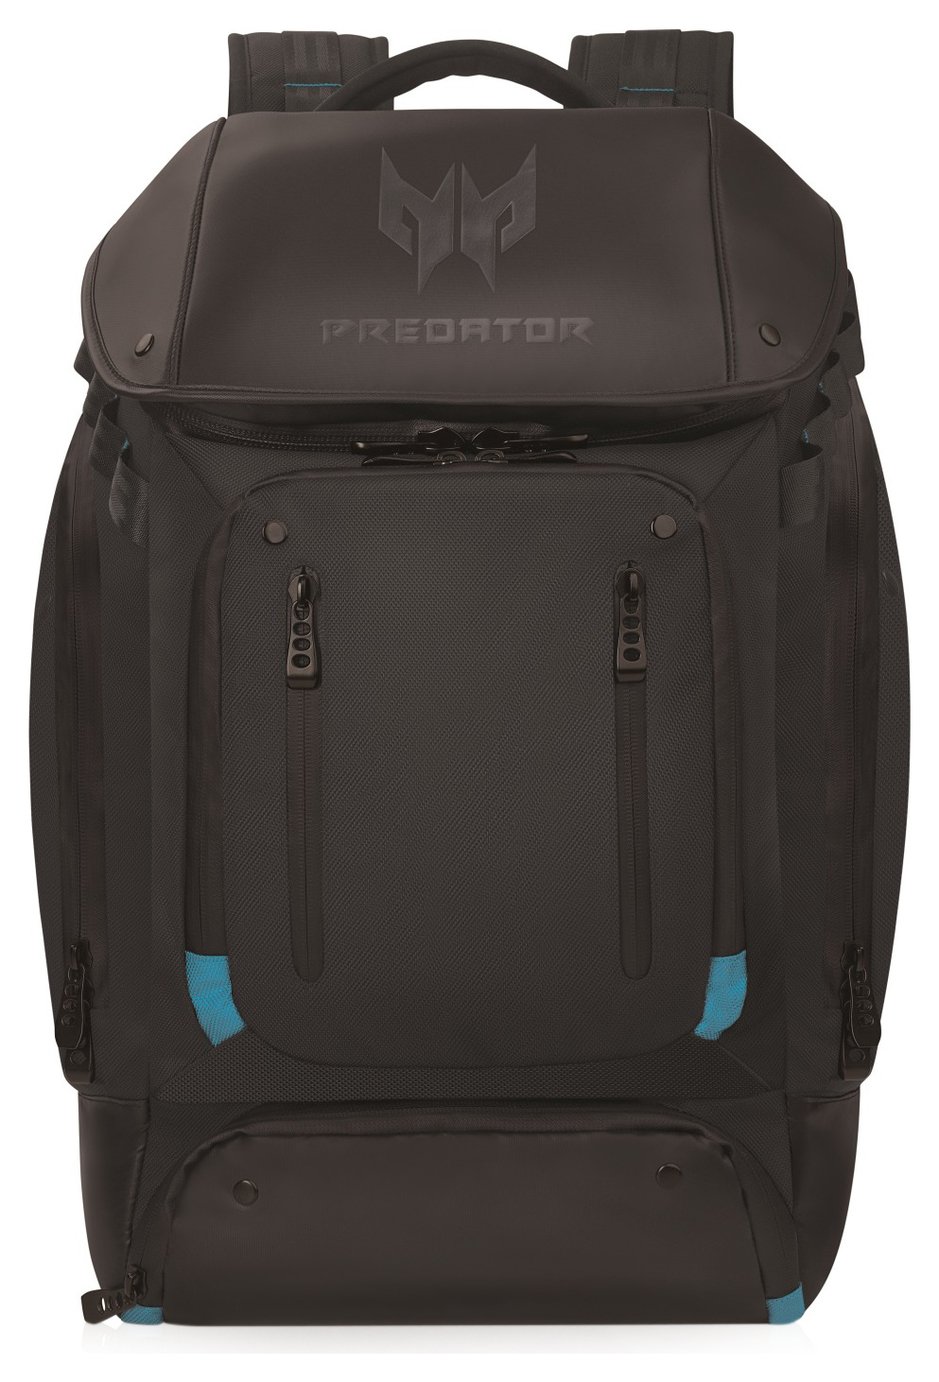 Acer Predator Utility 17 Inch Laptop Gaming Backpack Review